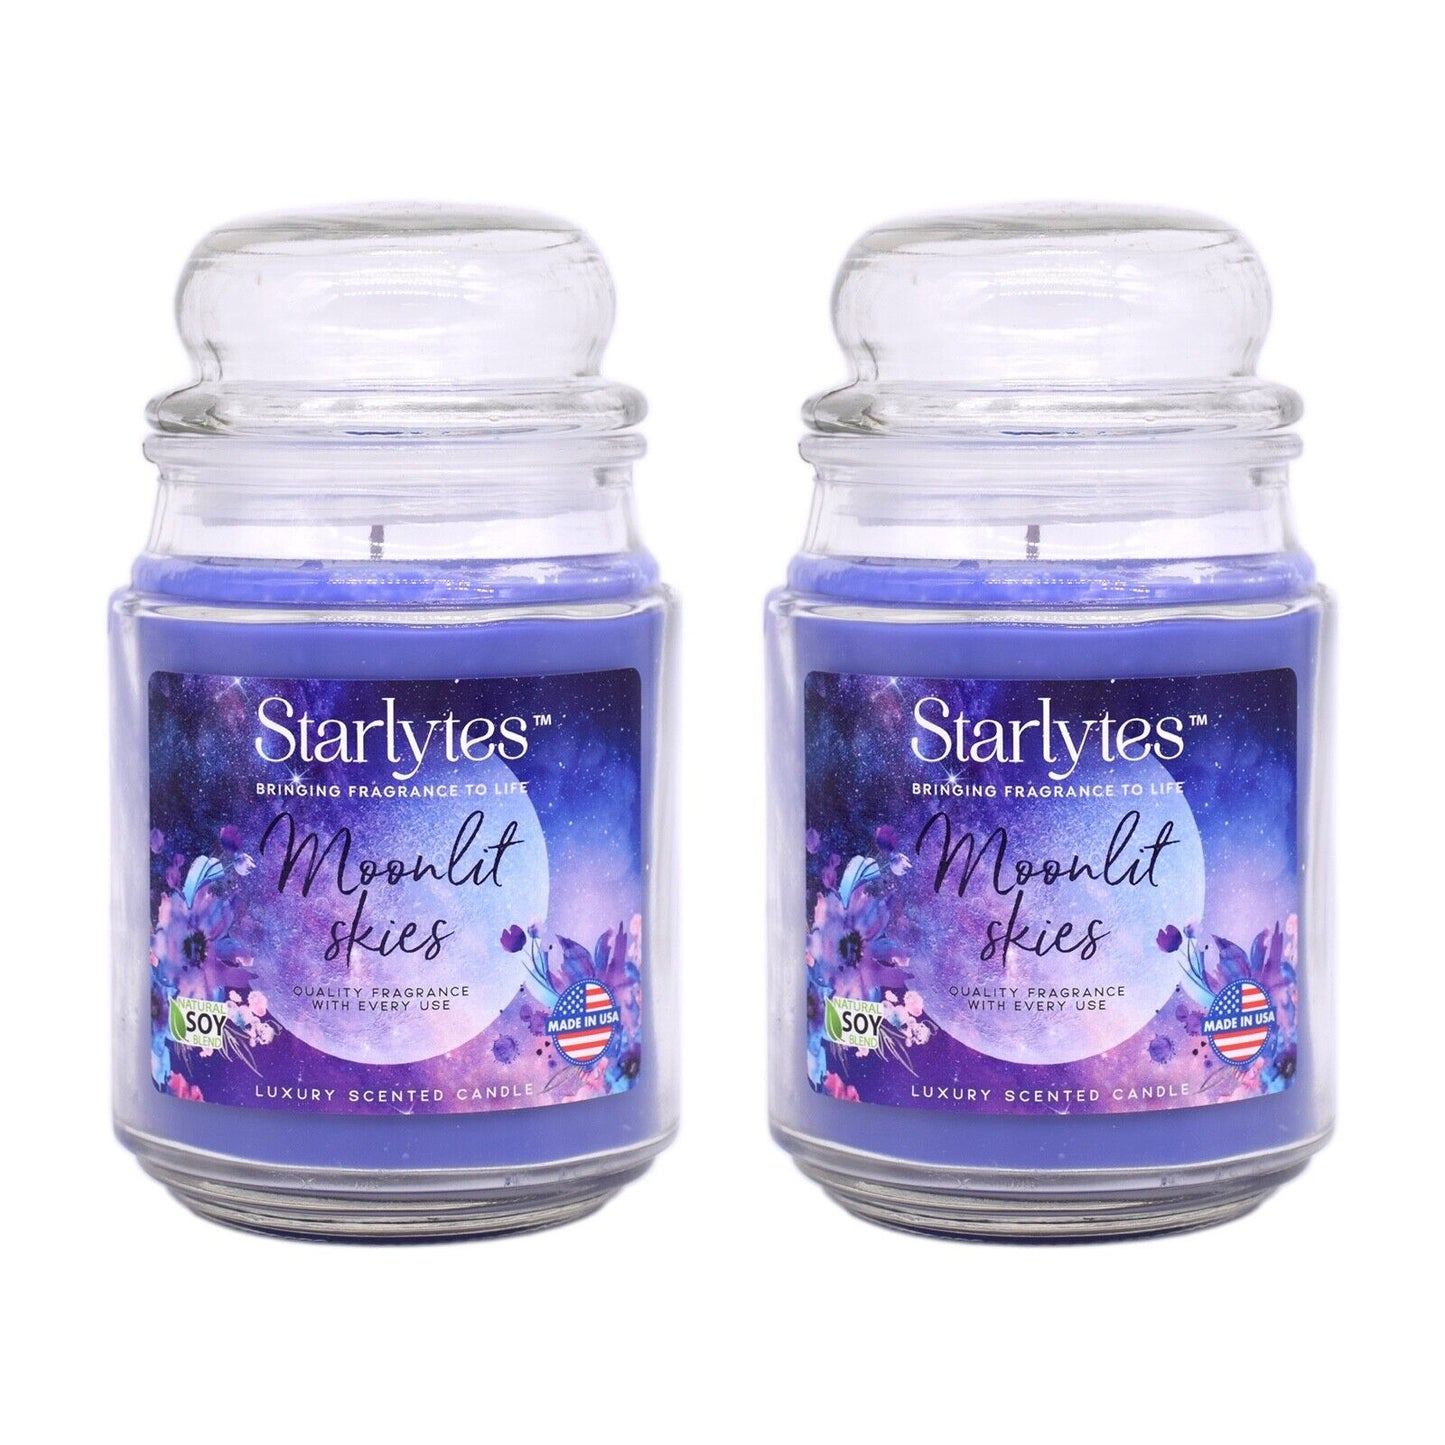 2x Starlytes Moonlit Skies Luxury Scented Candle 510g 125hr Burn Time